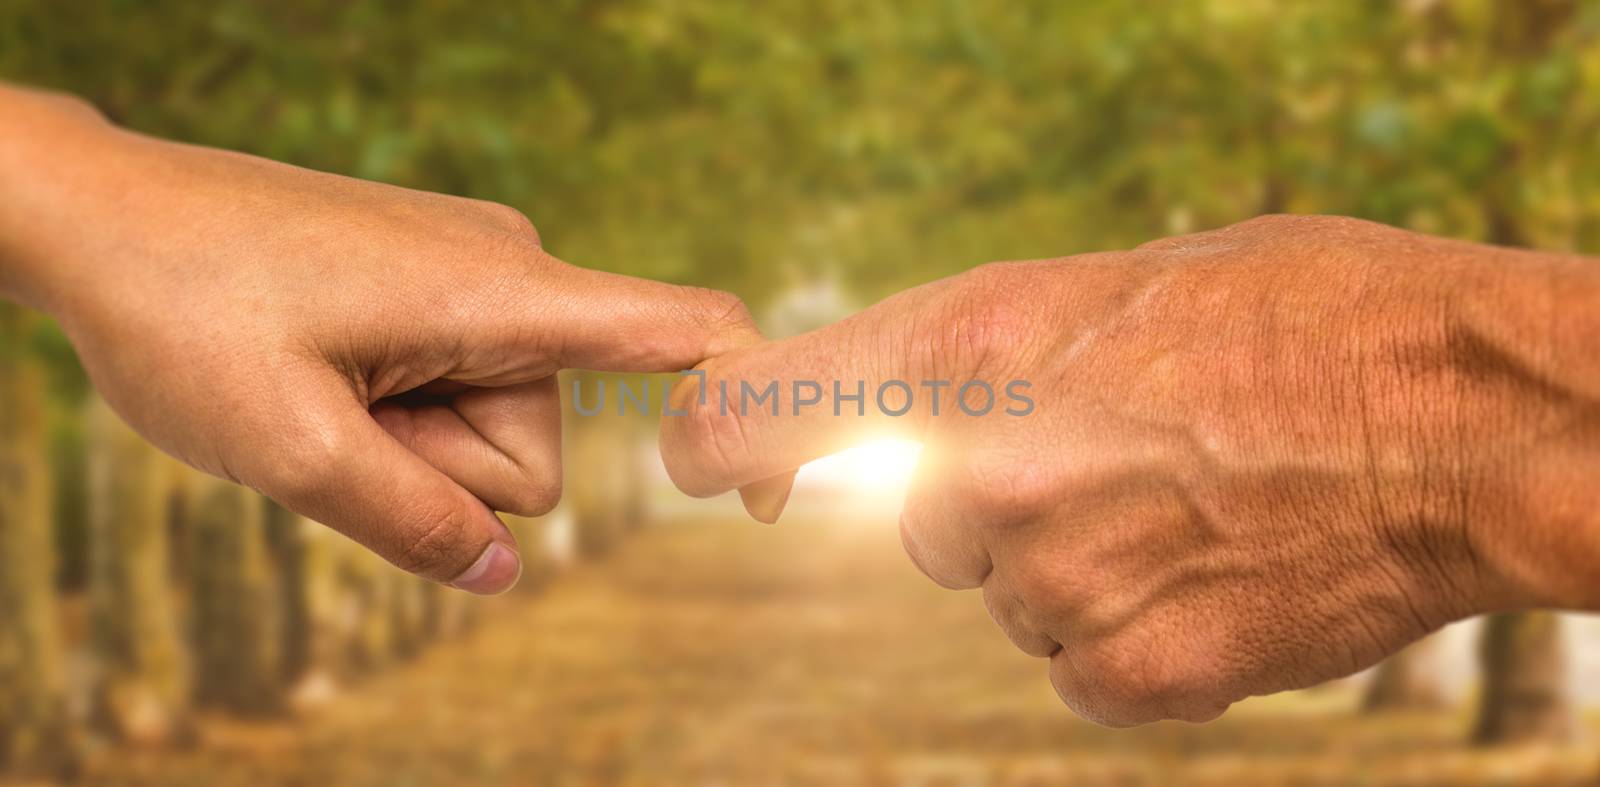 Cropped hands of people holding fingers against walkway along lined trees in the park